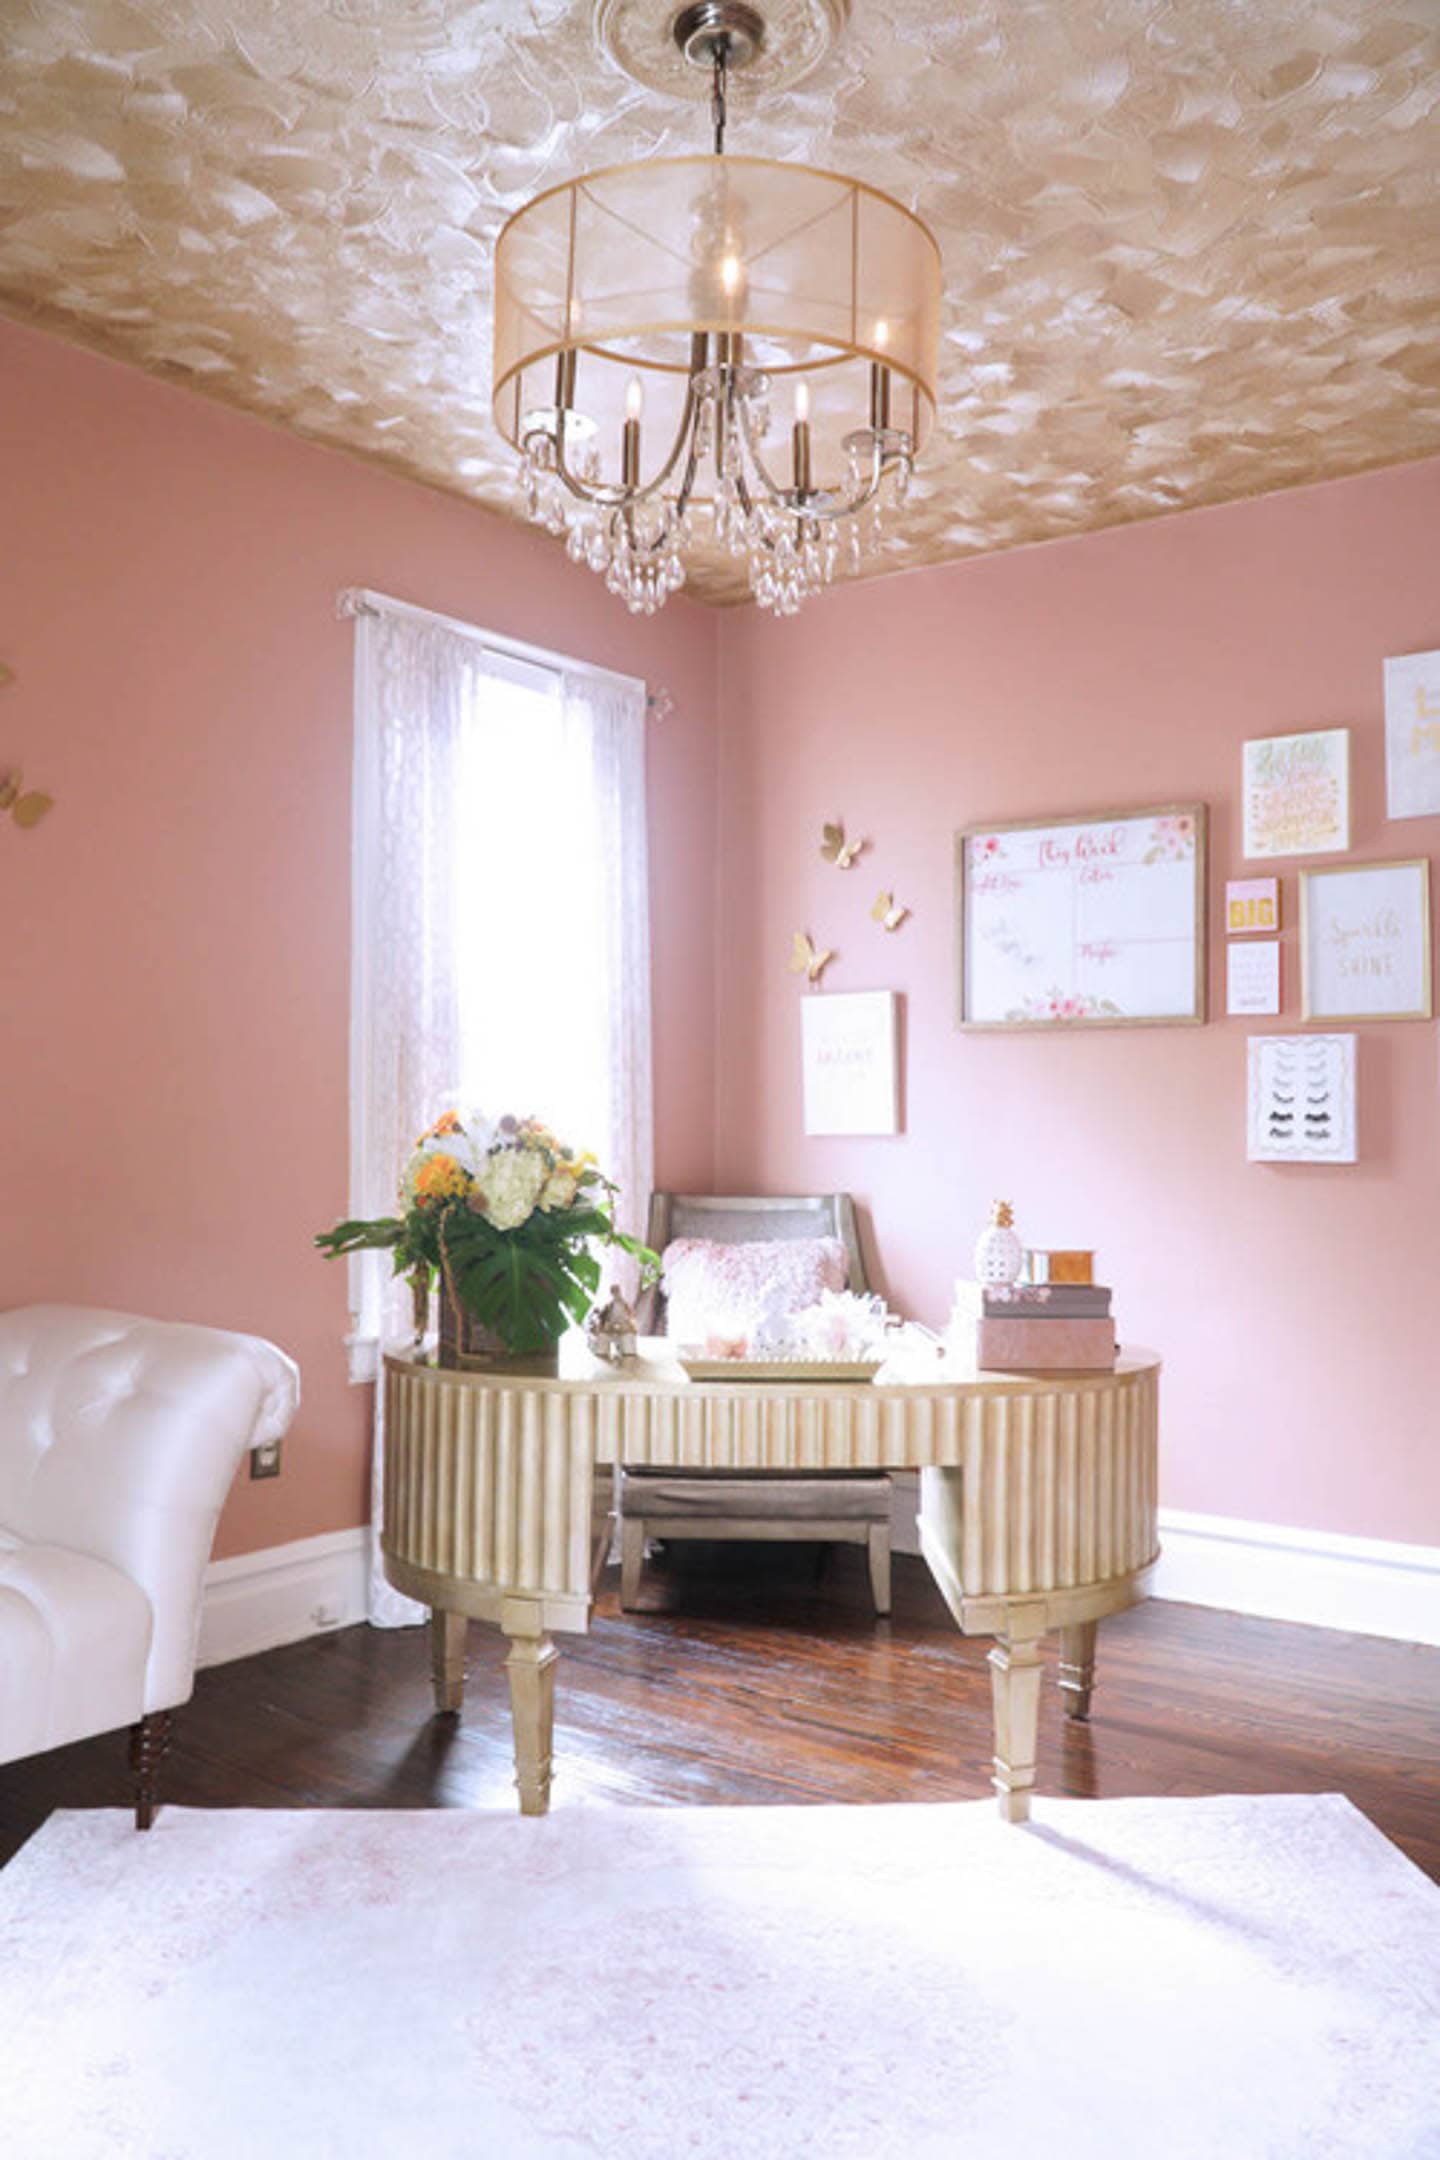 Hollywood glam home office with pink walls, ceiling and chandelier